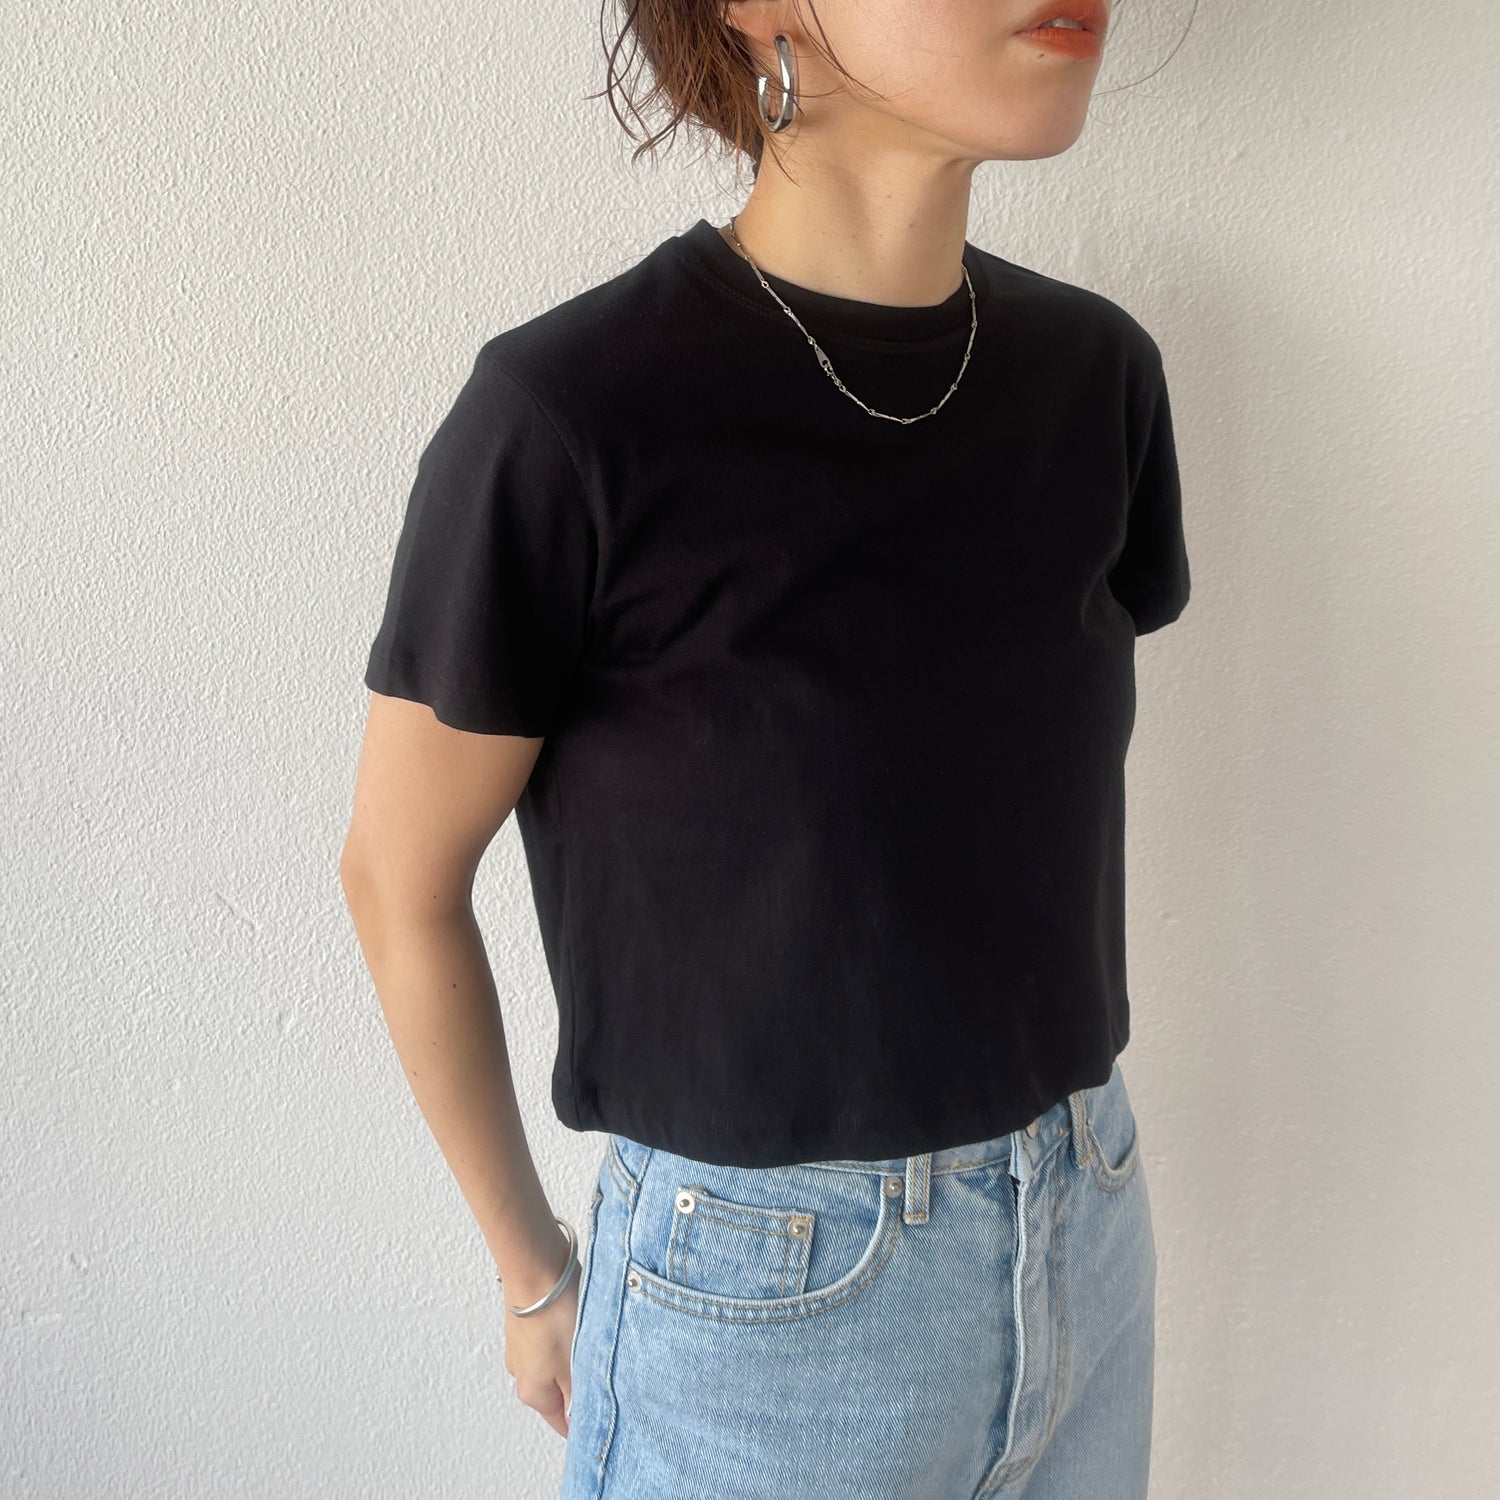 daily daily compact tee / black